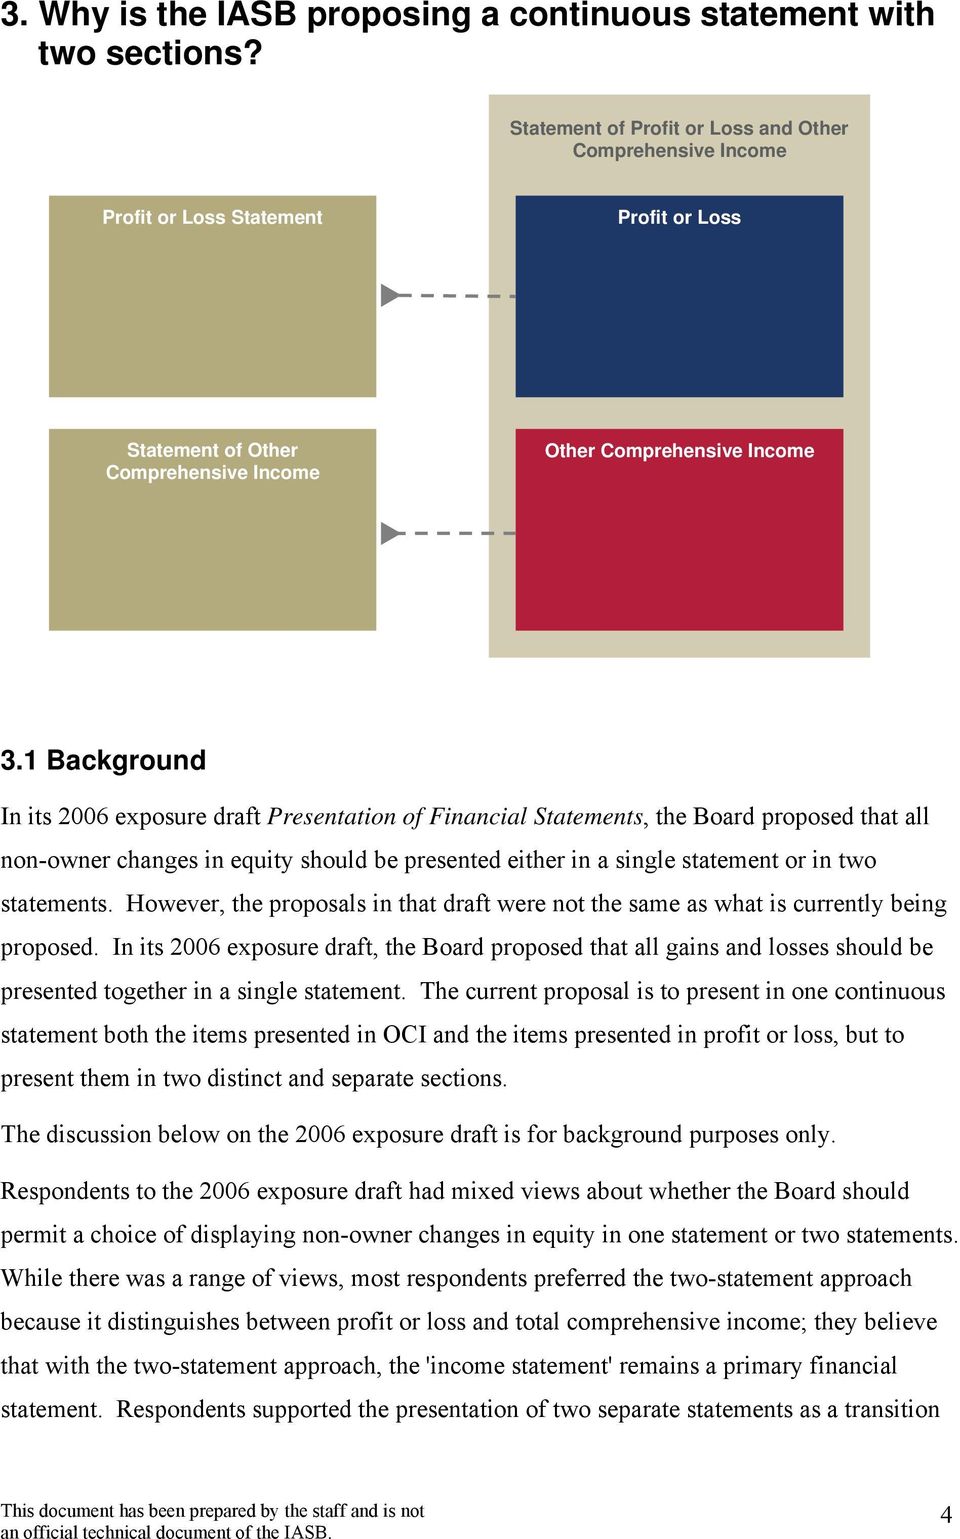 1 Background In its 2006 exposure draft Presentation of Financial Statements, the Board proposed that all non-owner changes in equity should be presented either in a single statement or in two